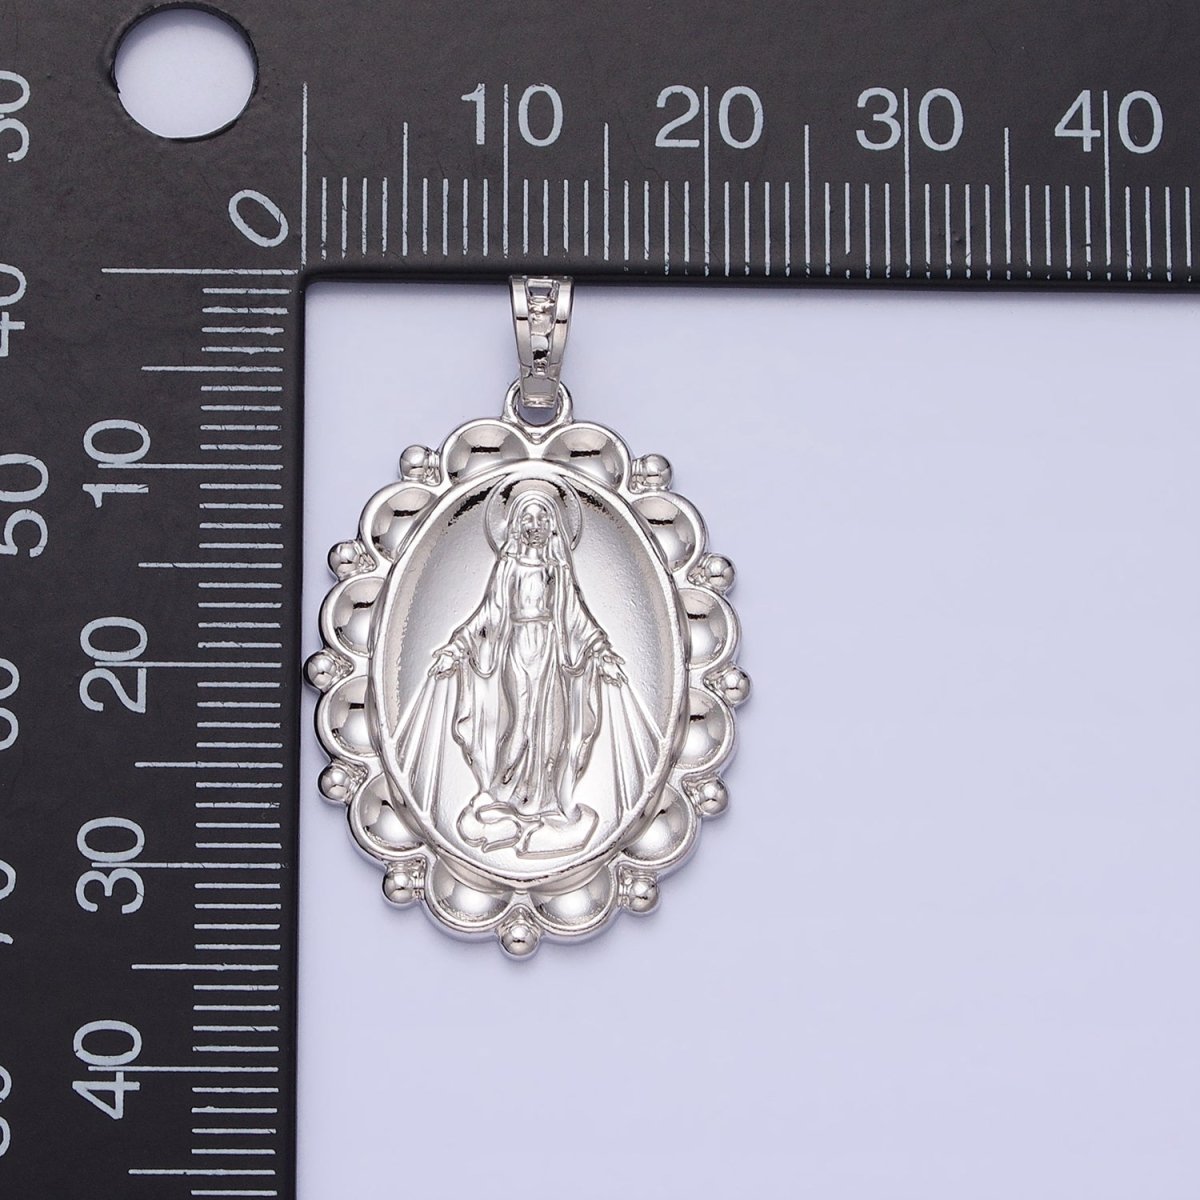 Silver Oval Miraculous Lady Pendant Catholic Virgin Mary Charm Religious Jewelry Making AA240 - DLUXCA